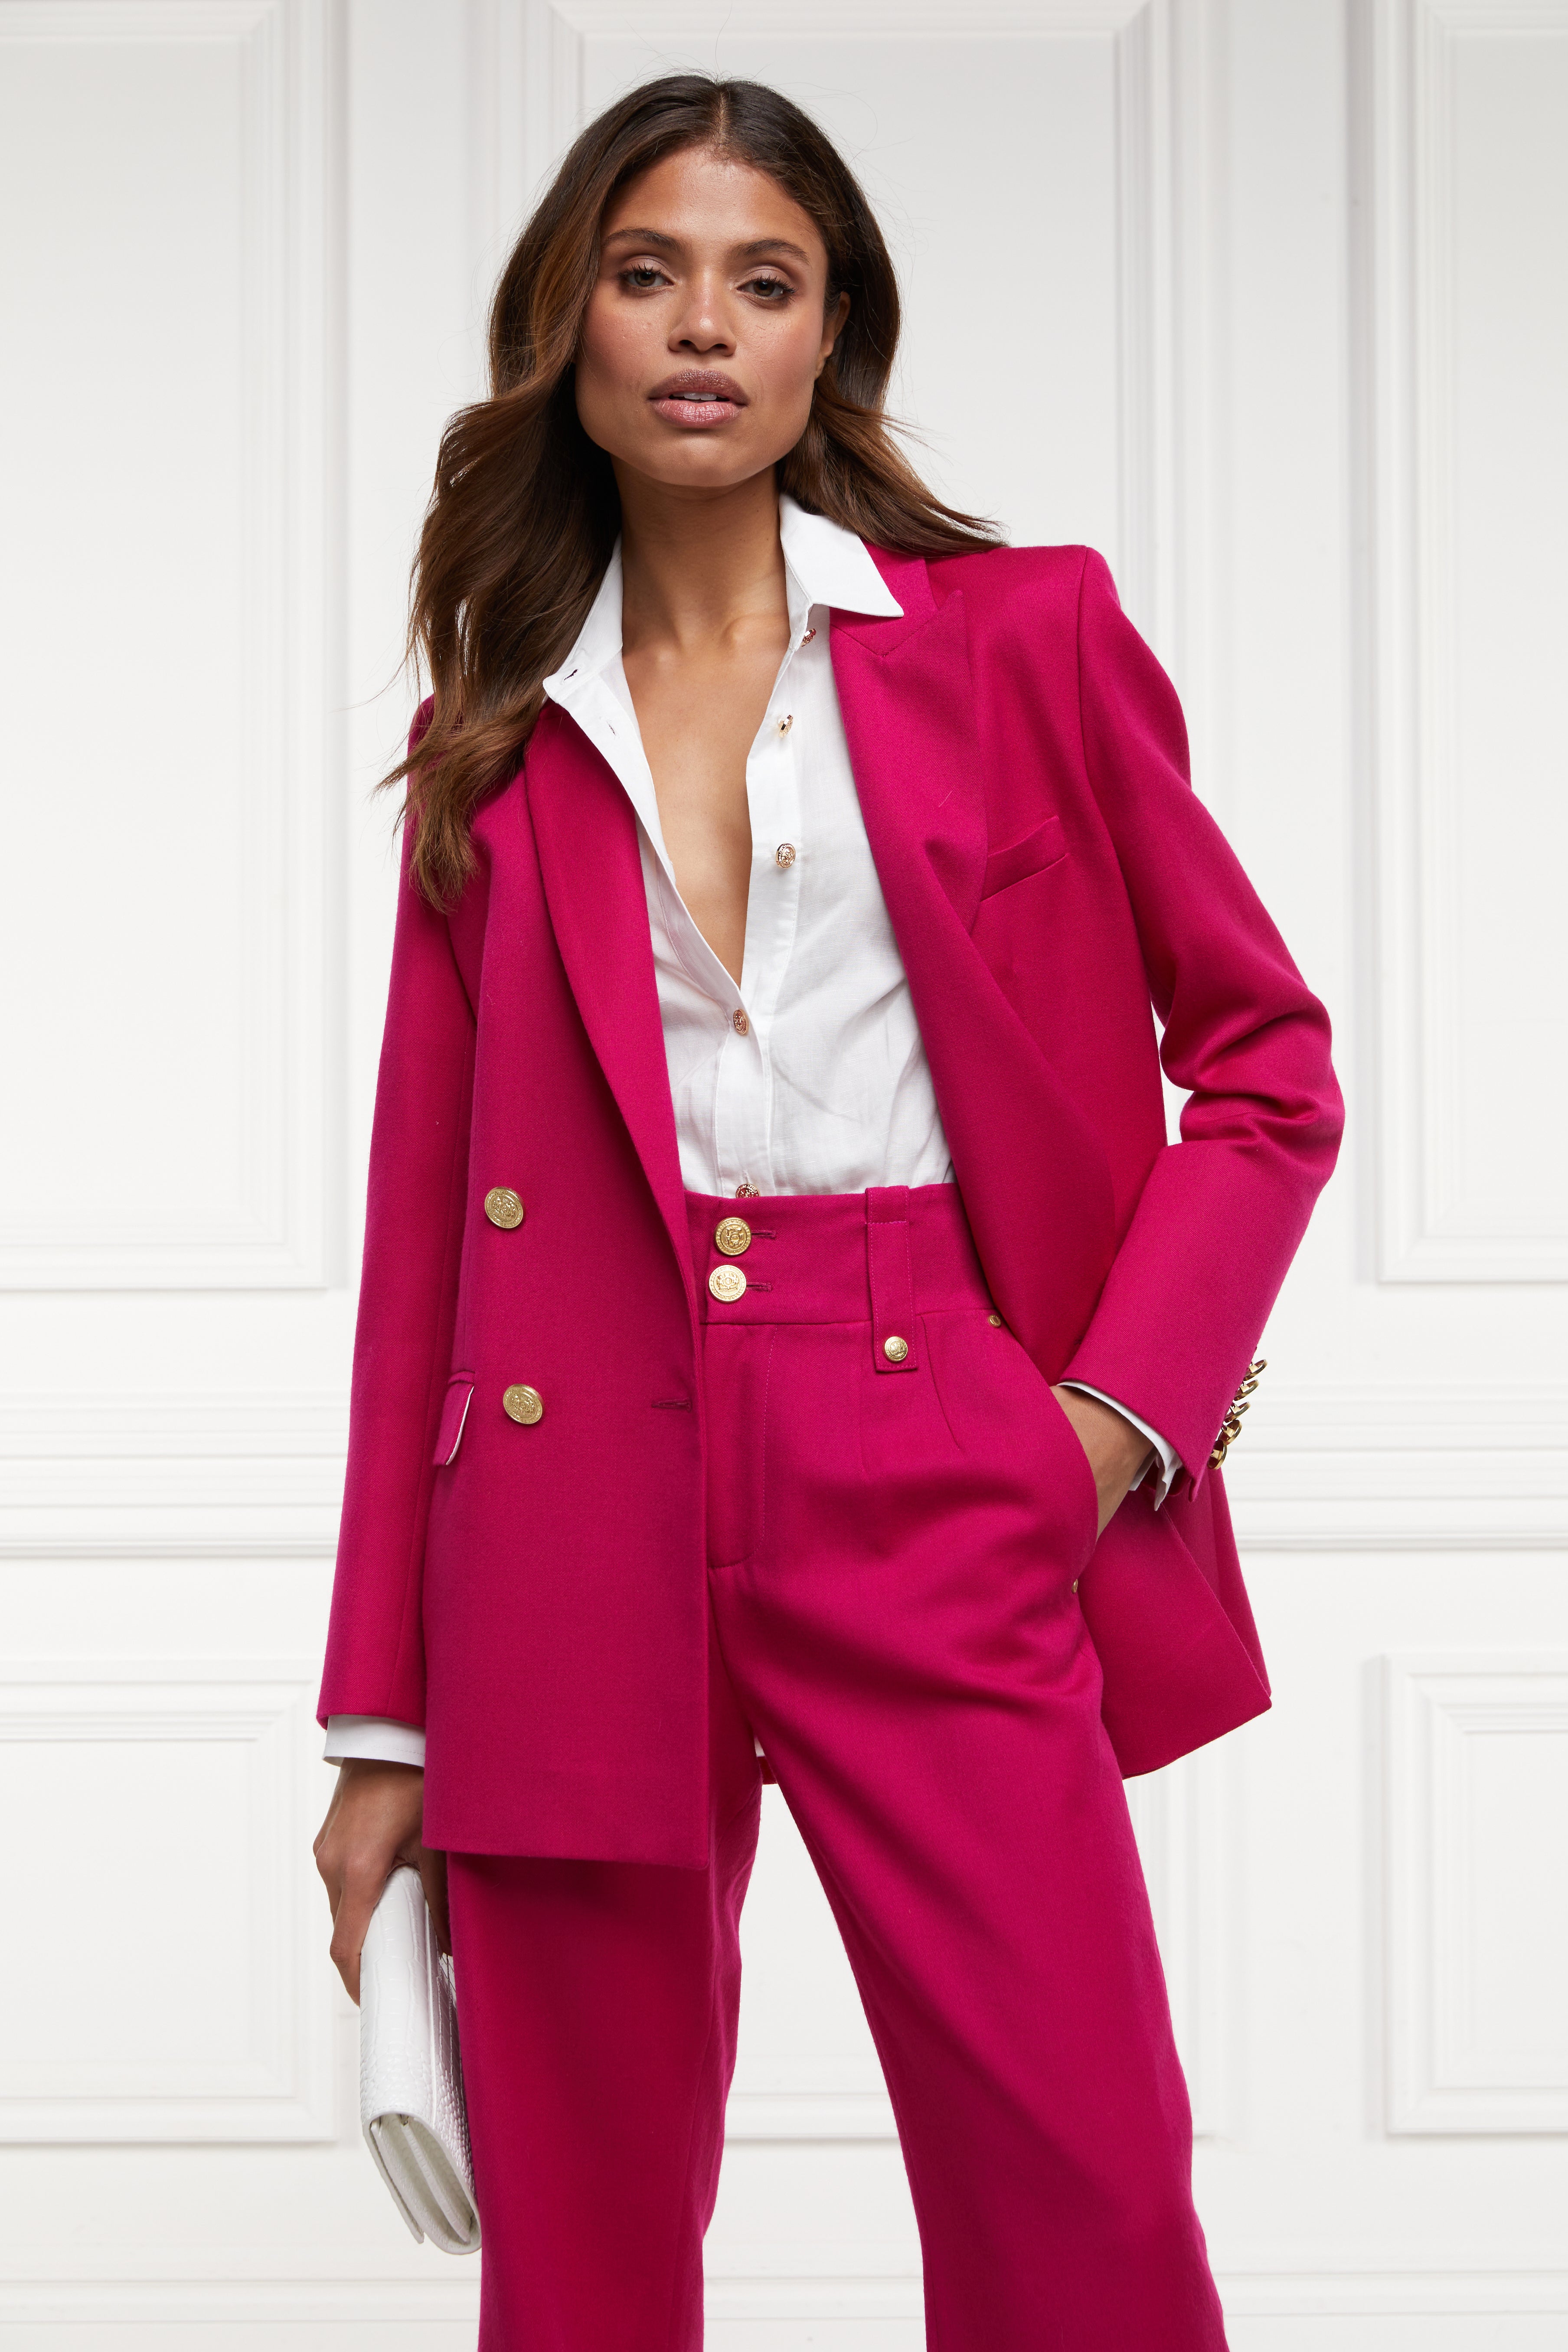 Hot Pink Pantsuit for Women, Pink Double-breasted Pantsuit for Women,  Classic Blazer Trouser Suit Set for Women, Formal Women's Suit 